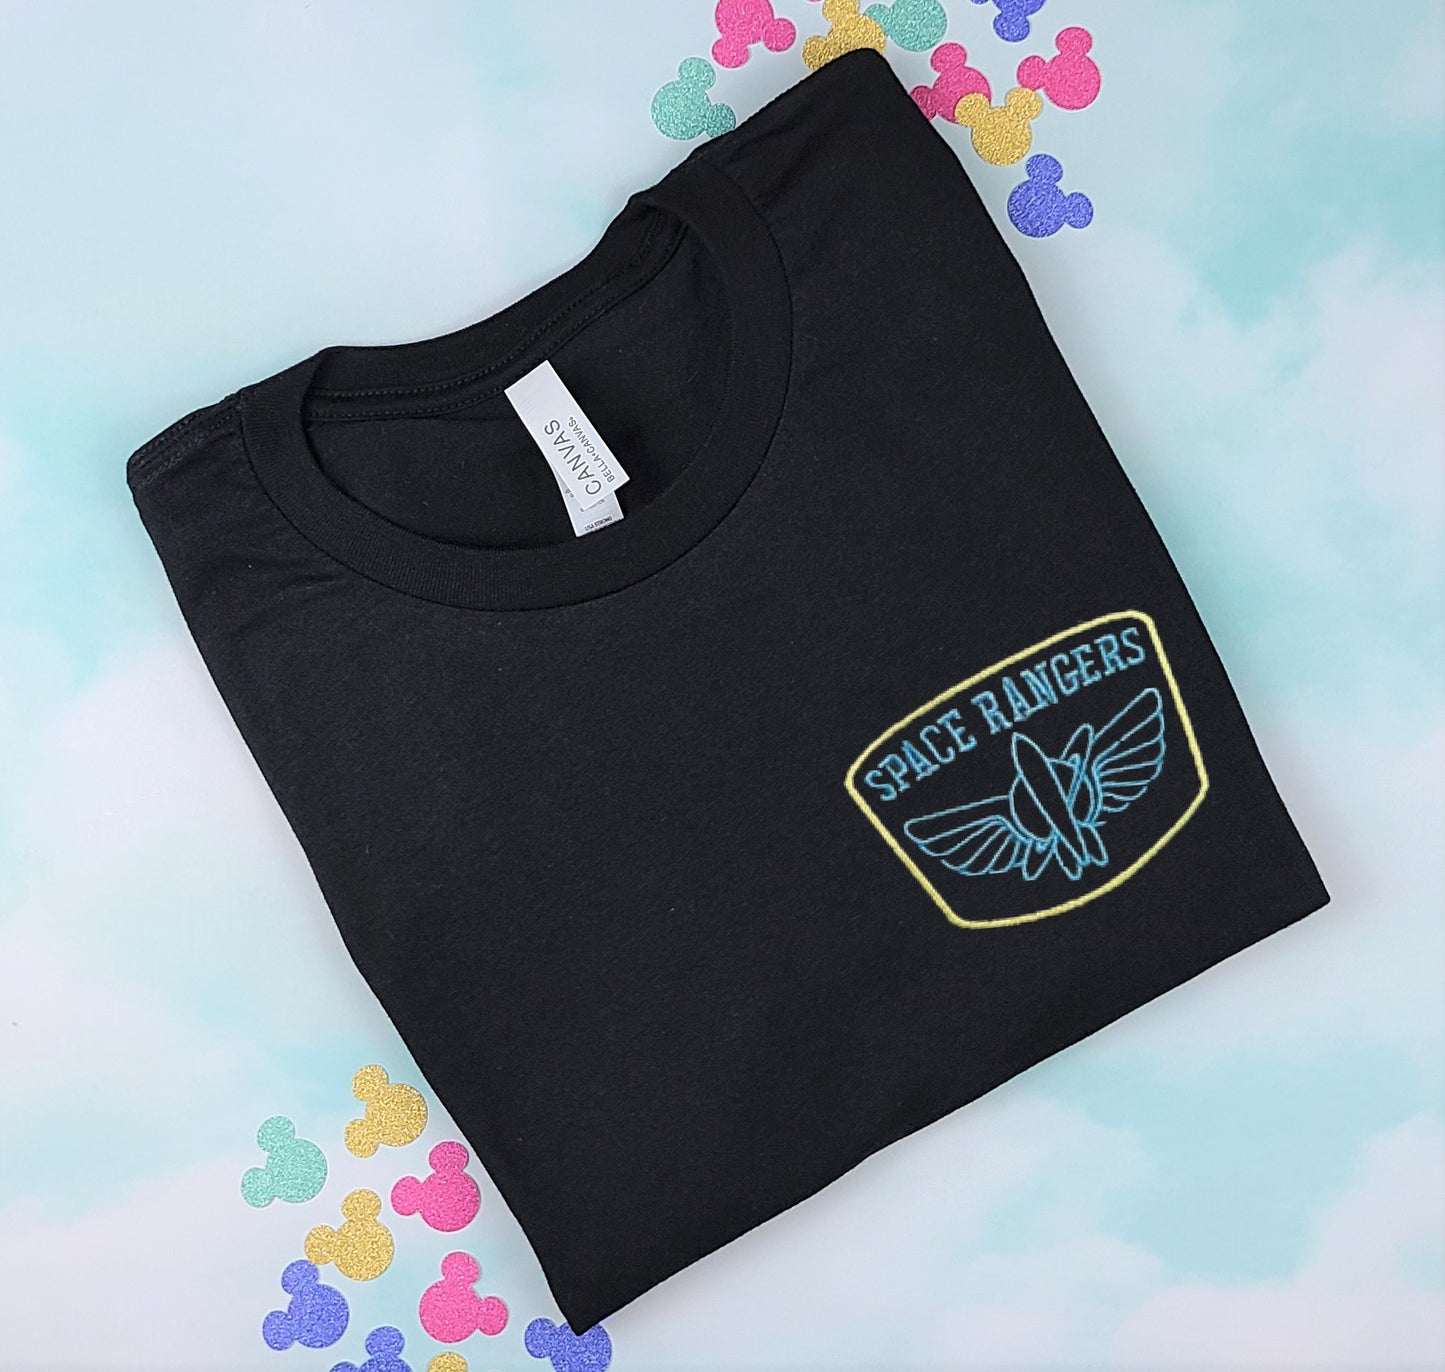 Space Rangers Black Embroidered Tee